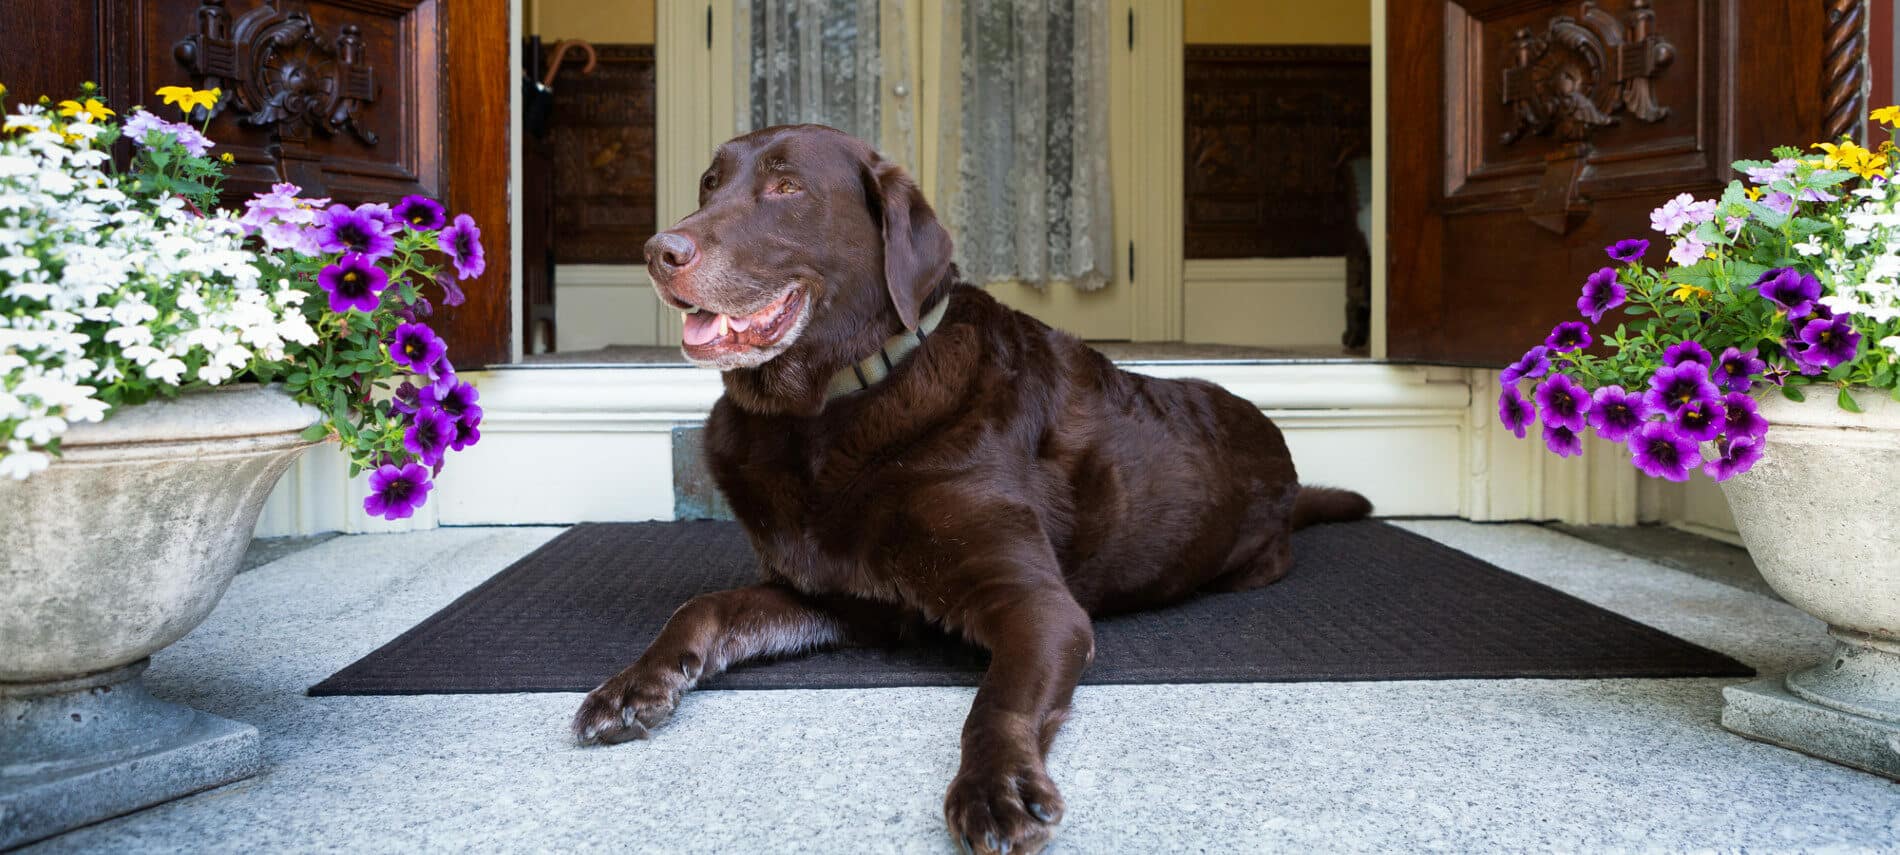 brown labrador retriever laying on mat at front door with flowers in pots on both sides